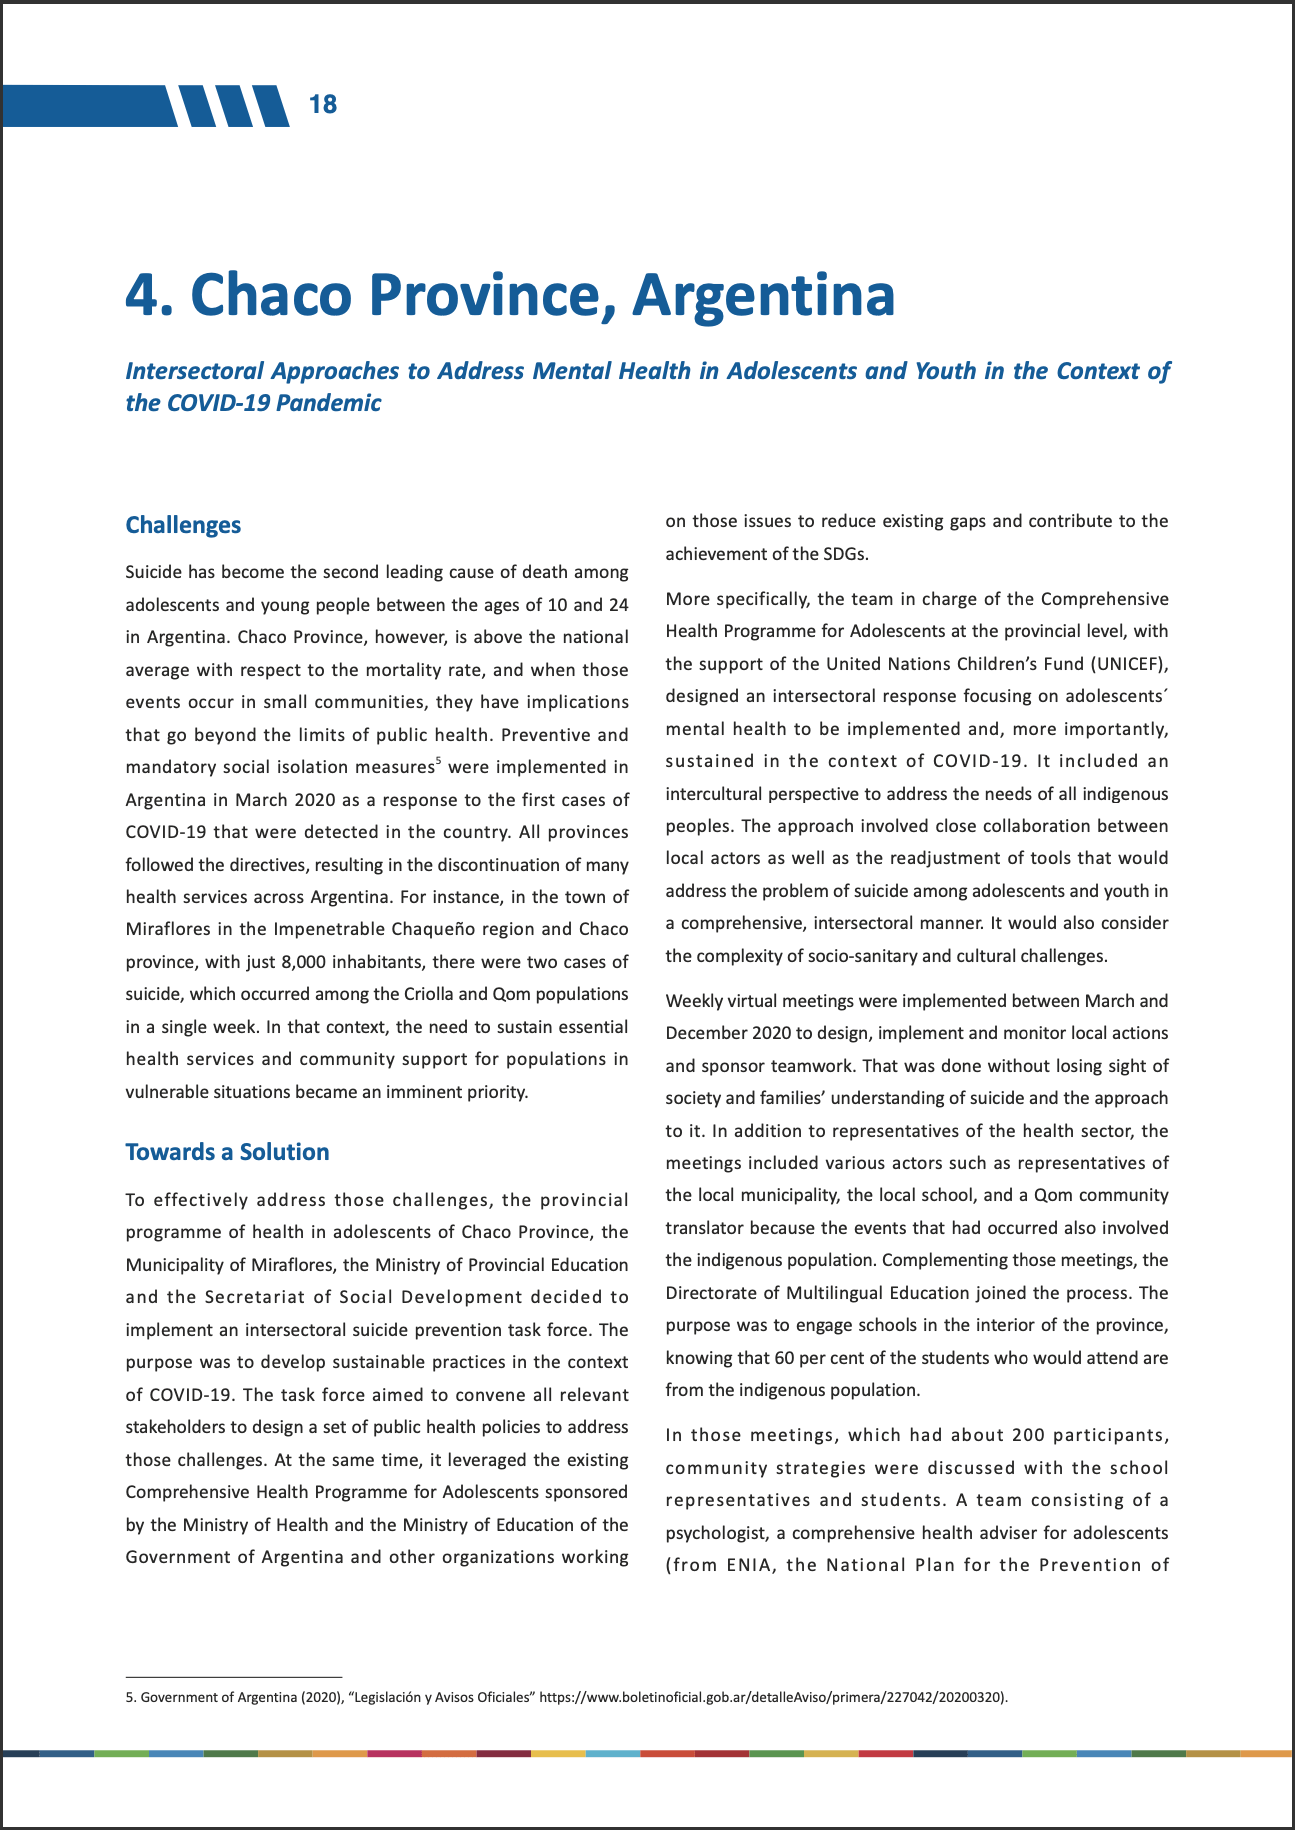 Intersectoral Approaches to Address Mental Health in Adolescents and Youth – Chaco Province, Argentina